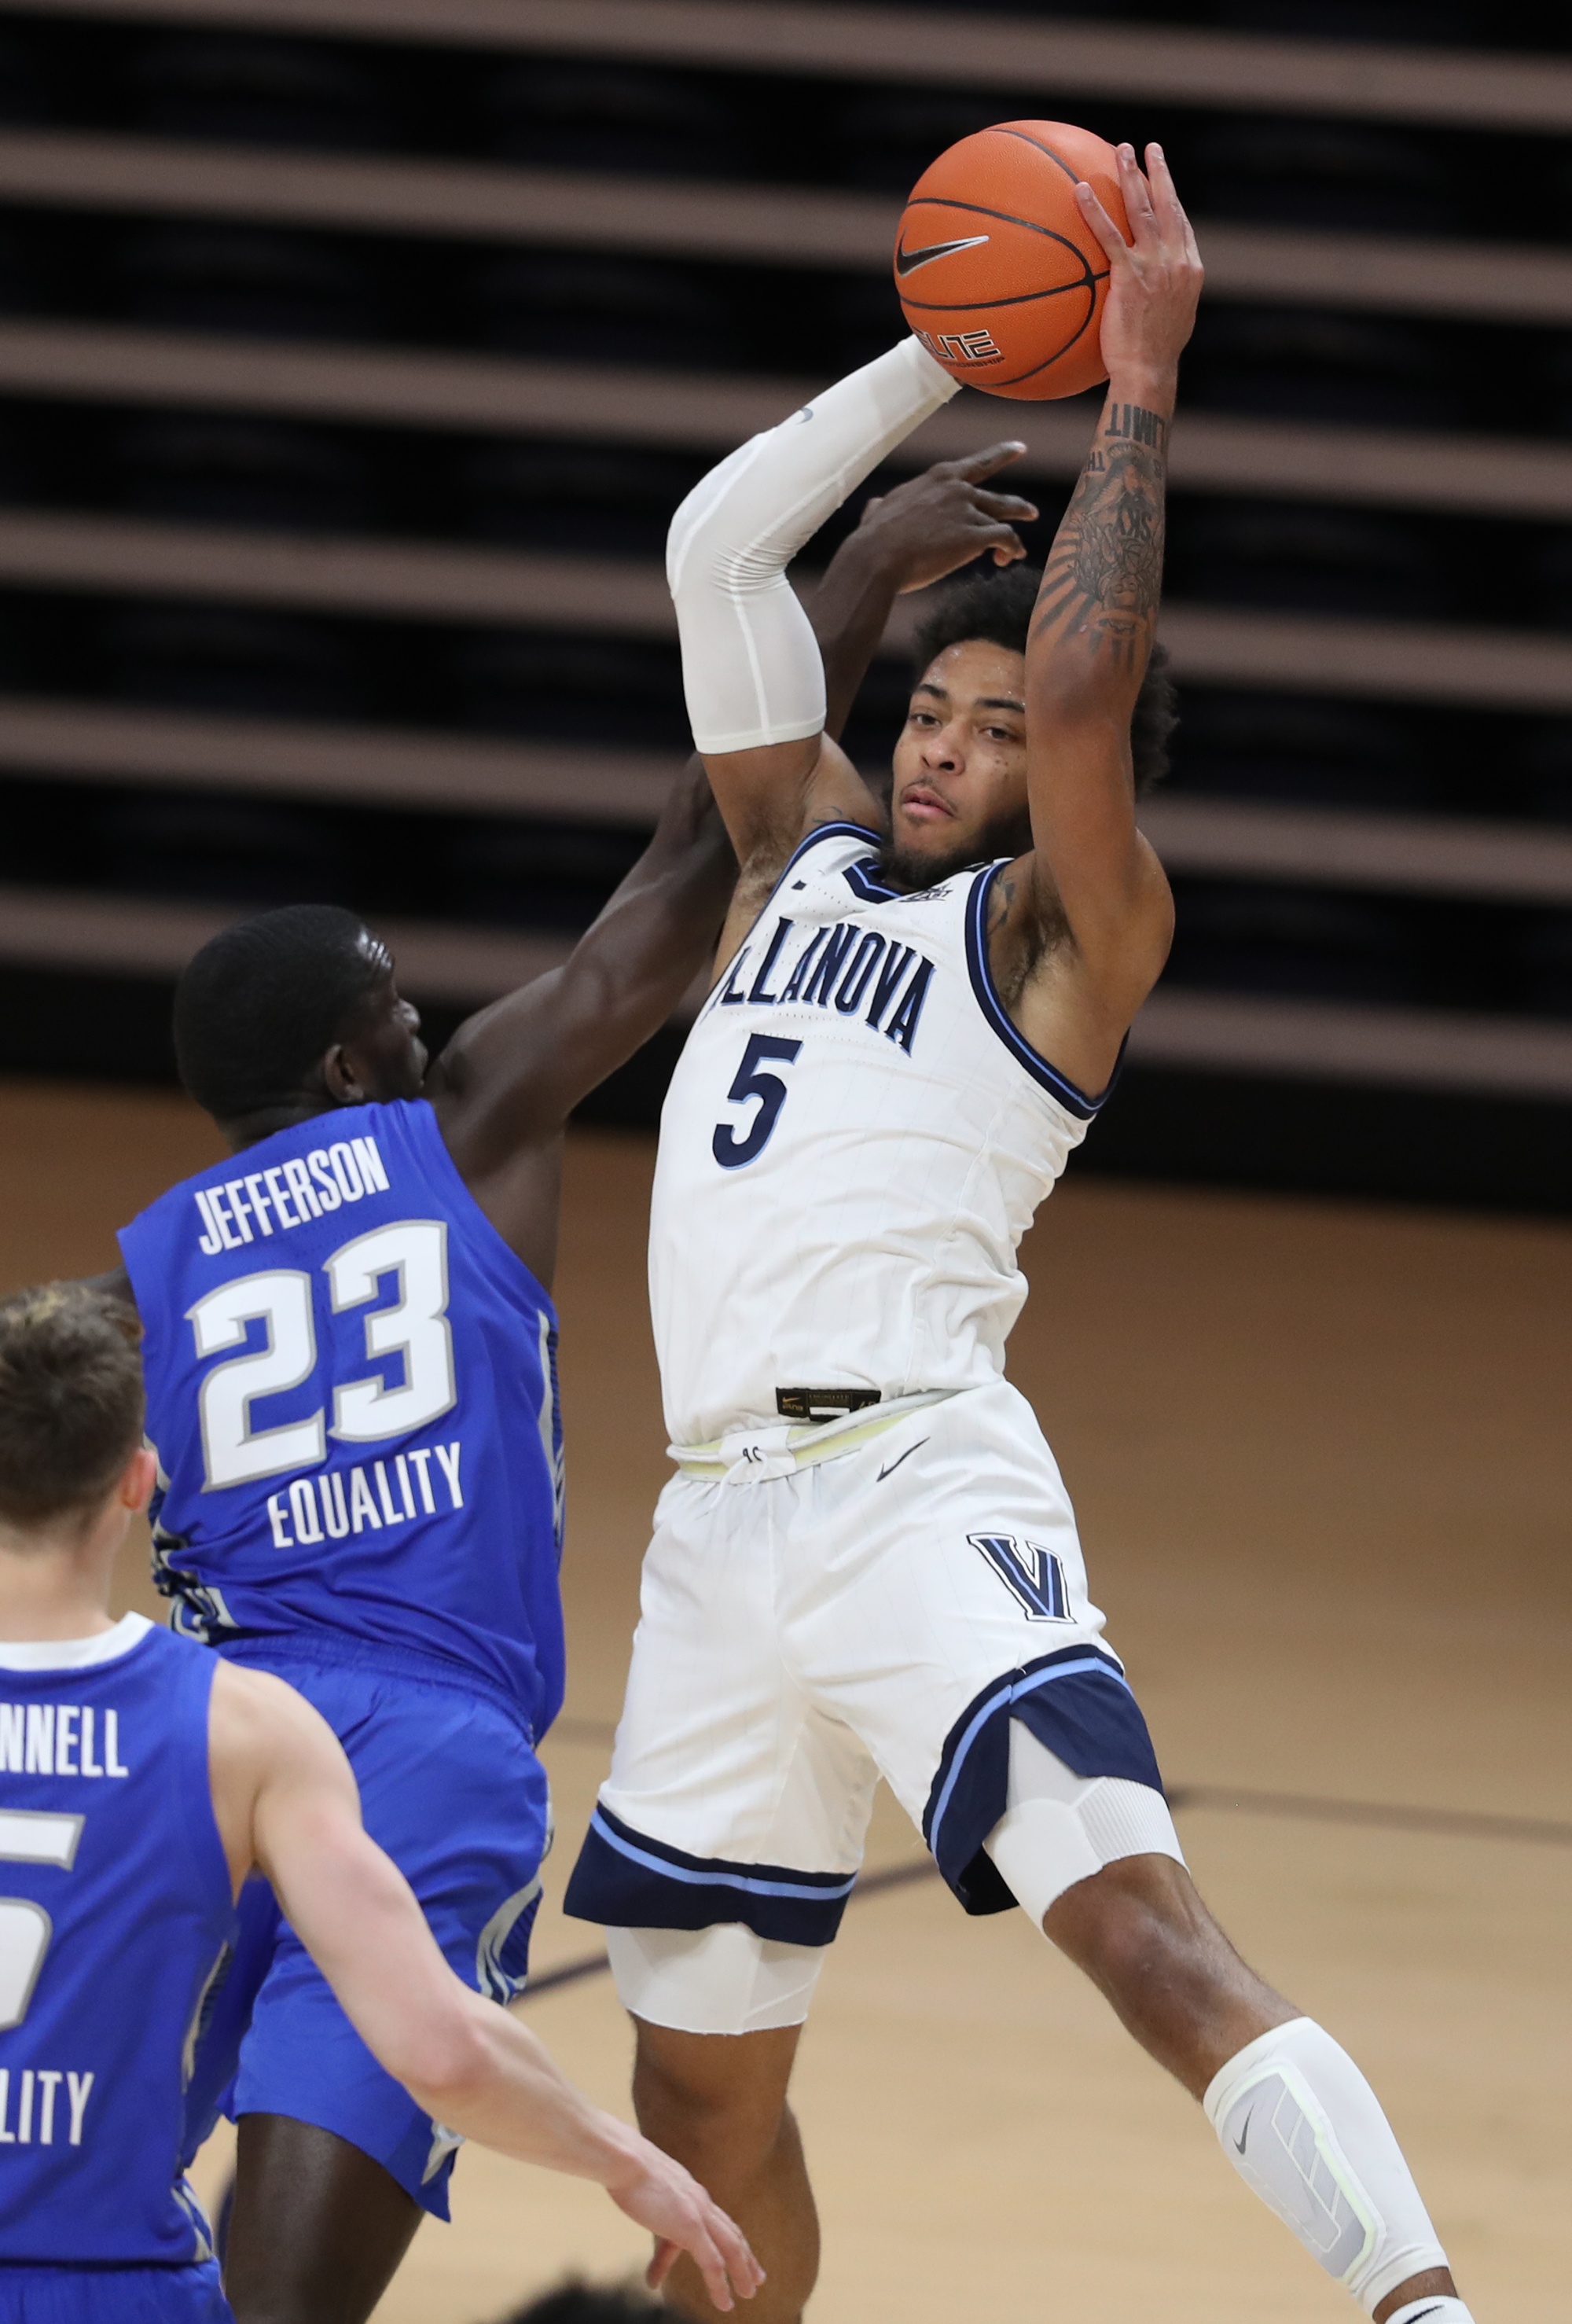 Collin Gillespie injury: Villanova PG out for season with torn MCL